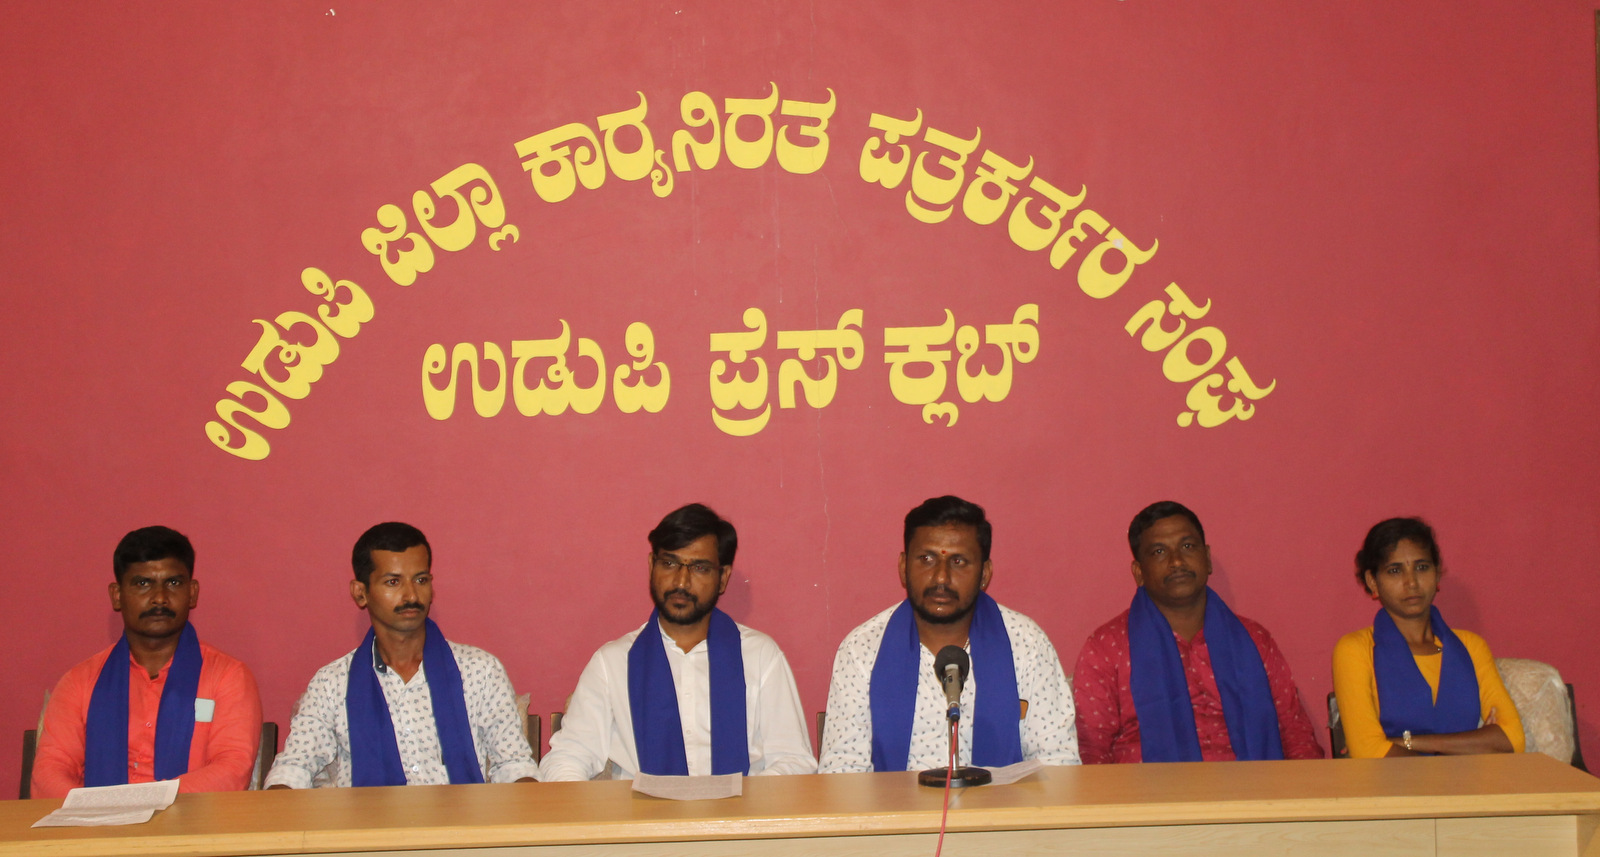 Karkala Taluk Debt Releif Complain Committee to hold protest on December 3 against torture of poor women